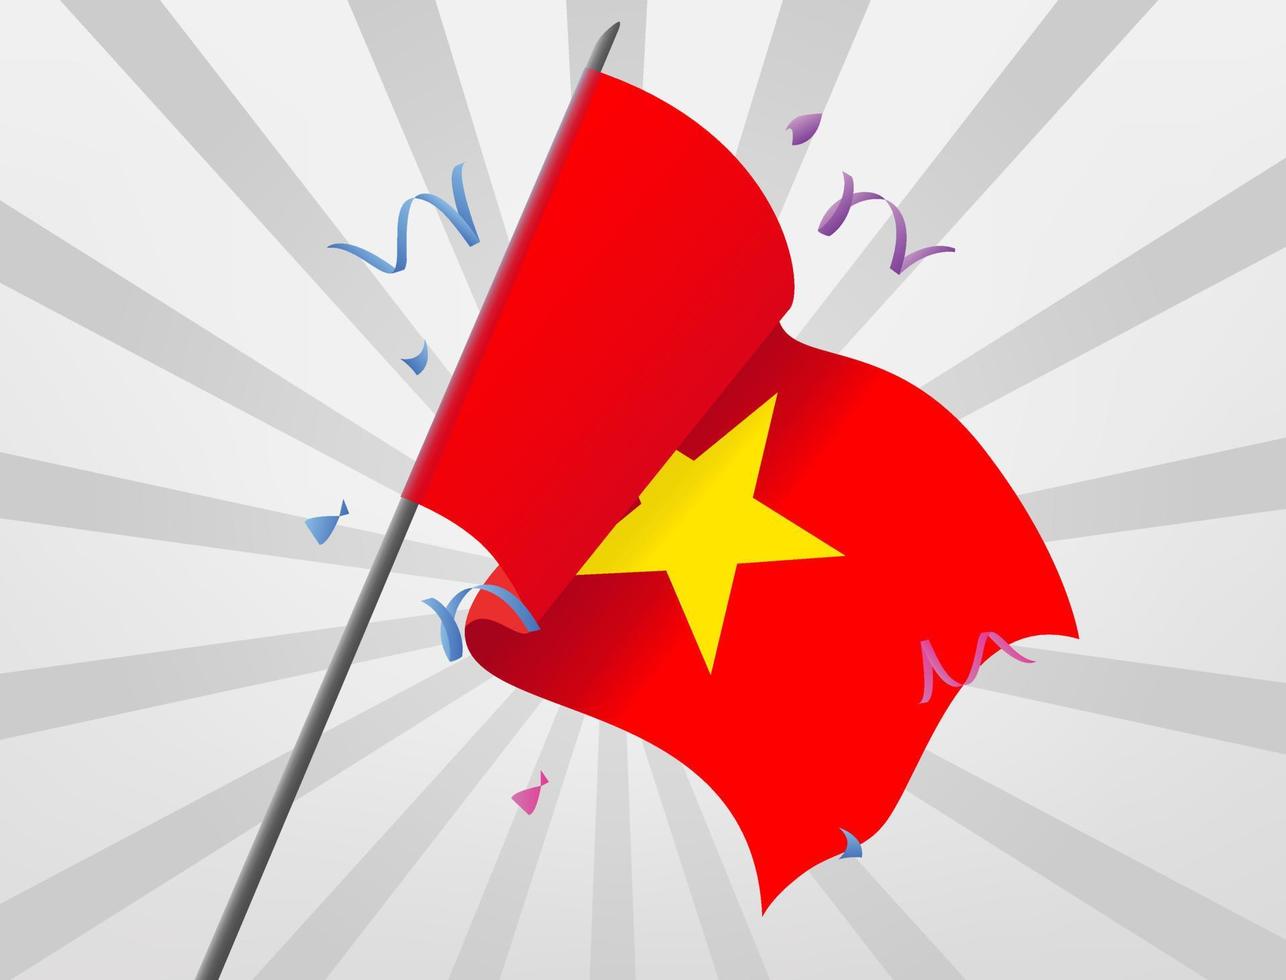 The celebratory flag of Vietnam is flying at high altitudes vector